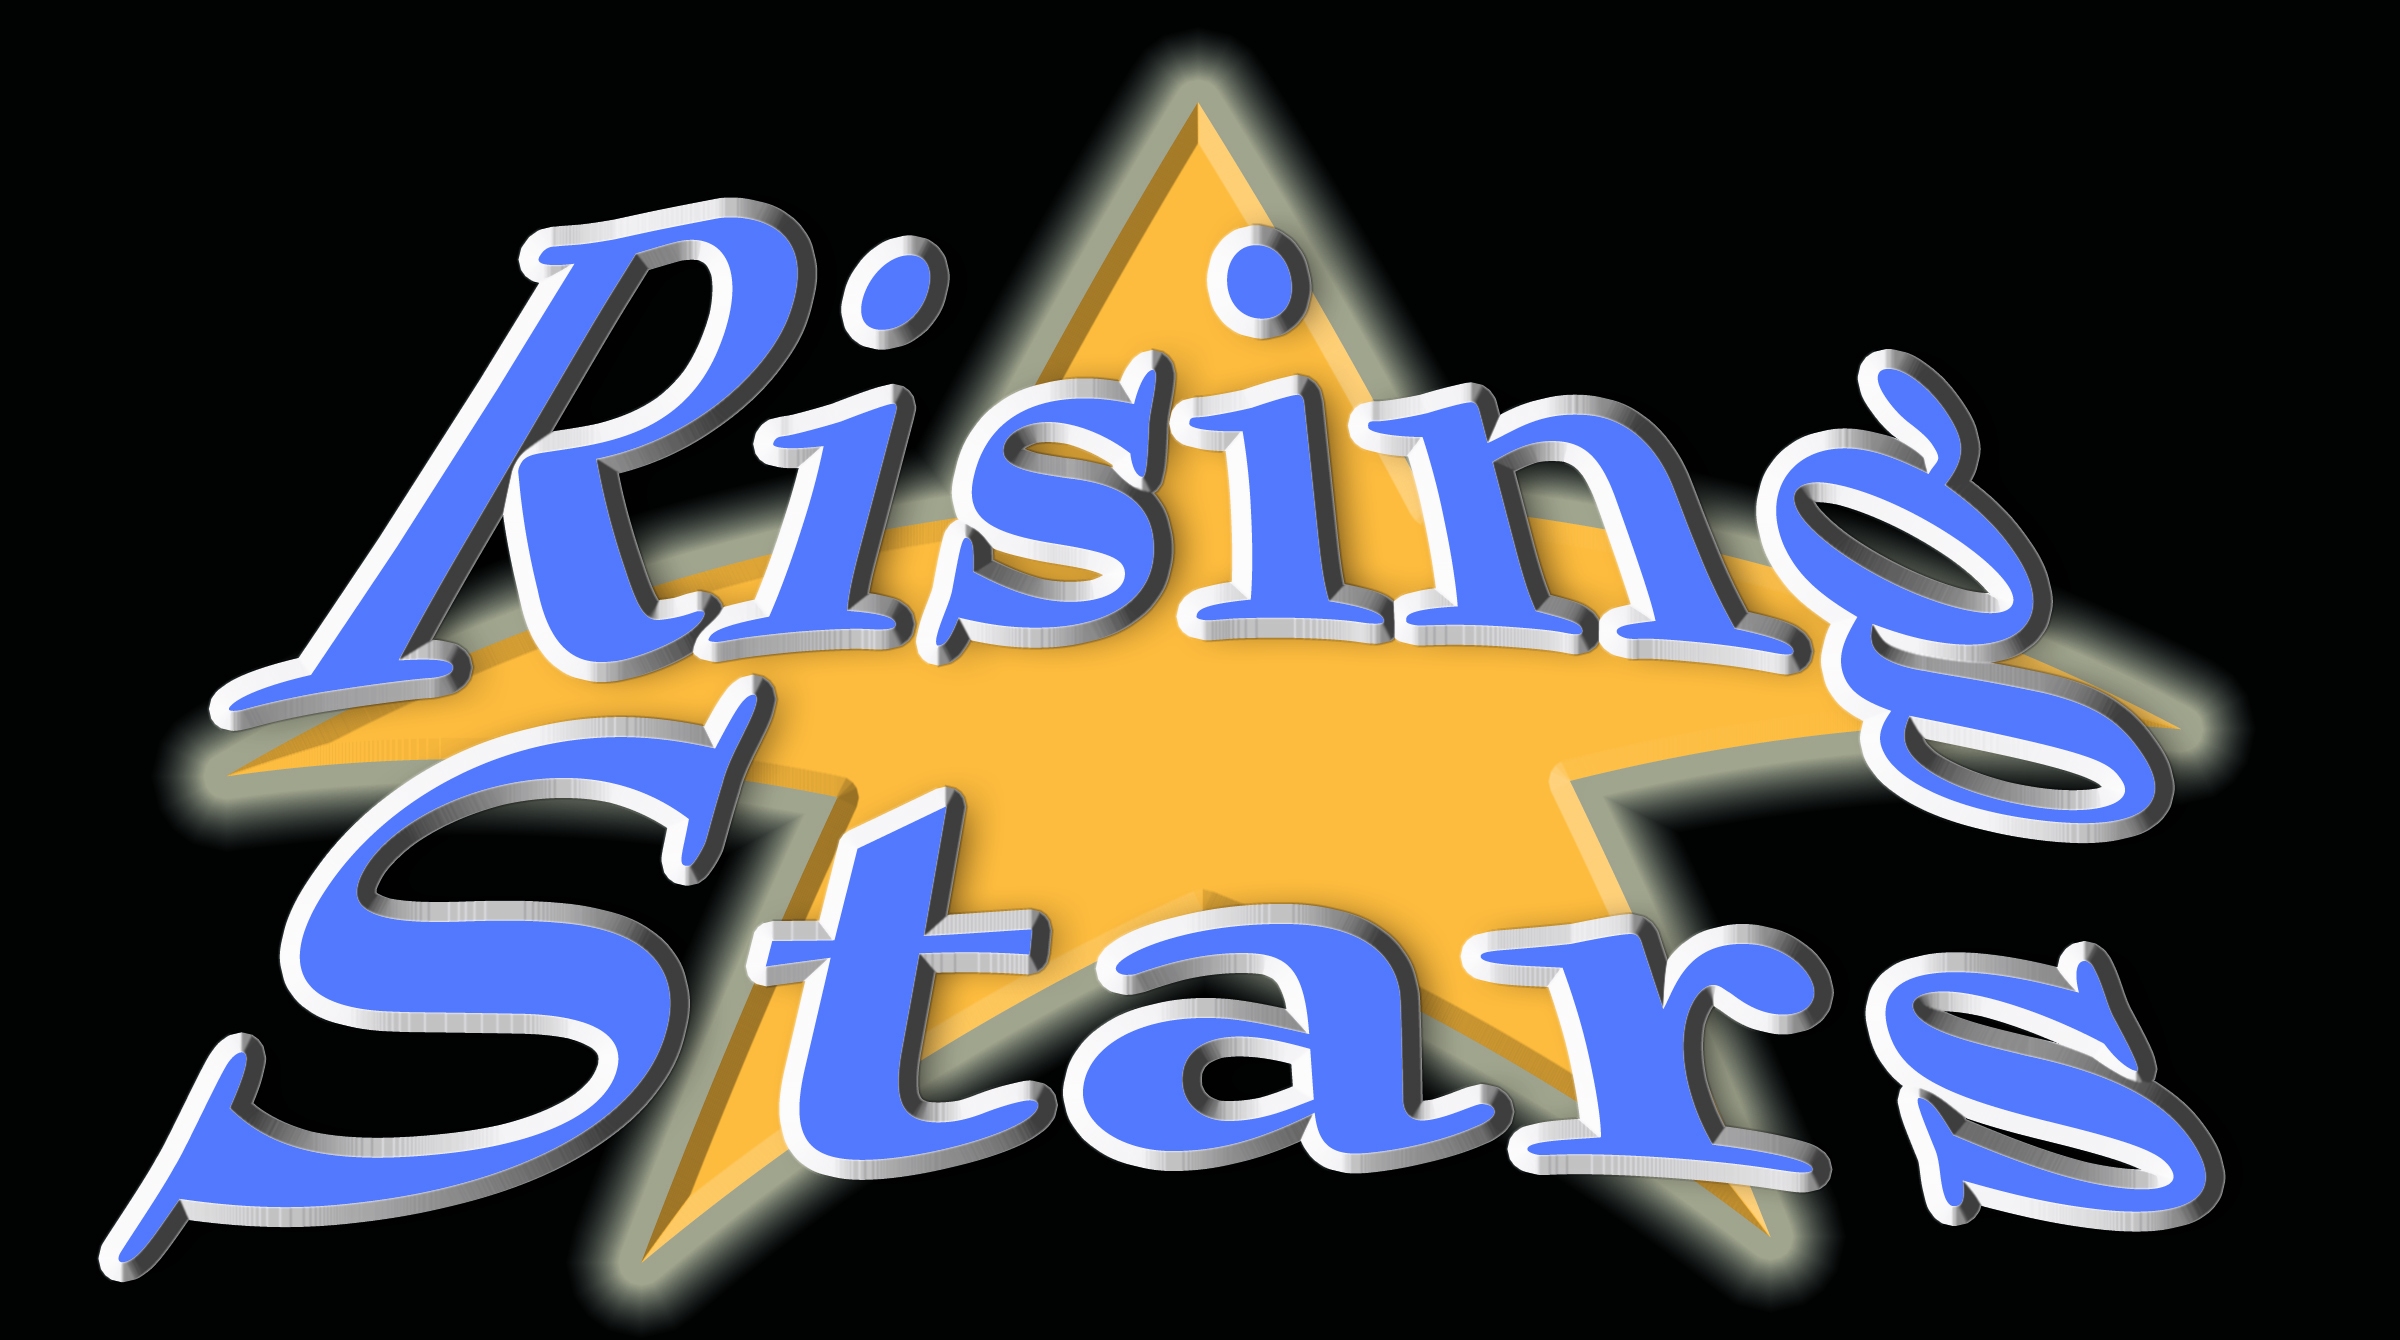 Rising Stars wallpapers, Comics, HQ Rising Stars pictures | 4K ...